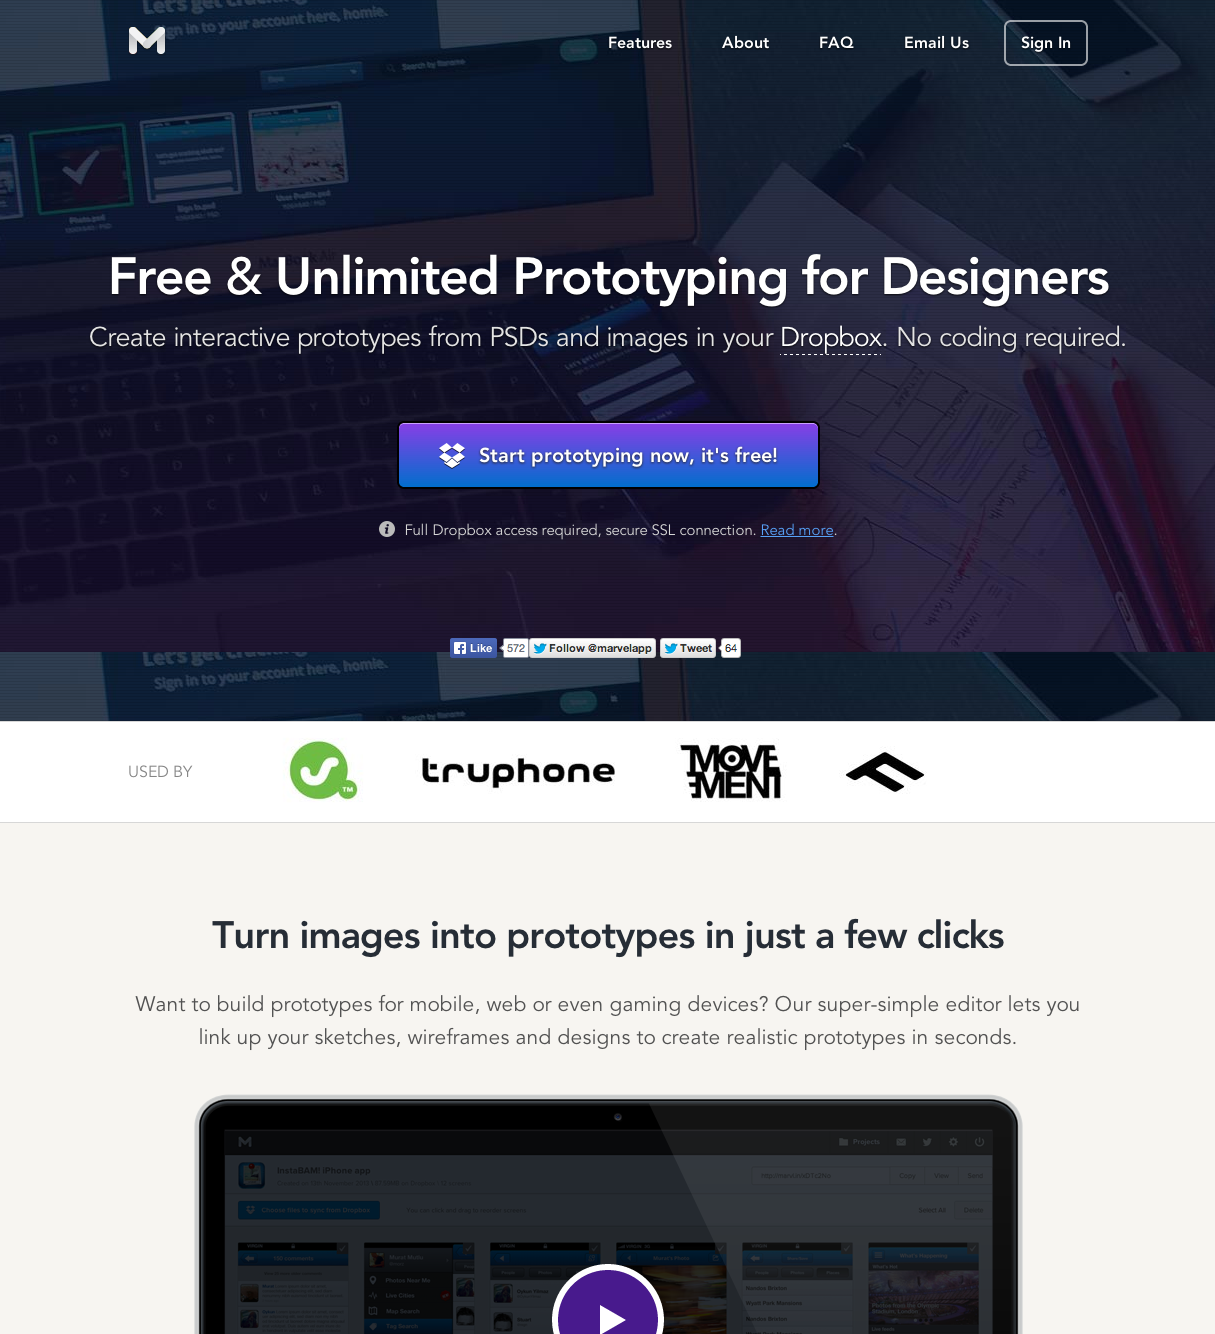 Marvel___free_mobile_and_web_prototyping_for_designers-2